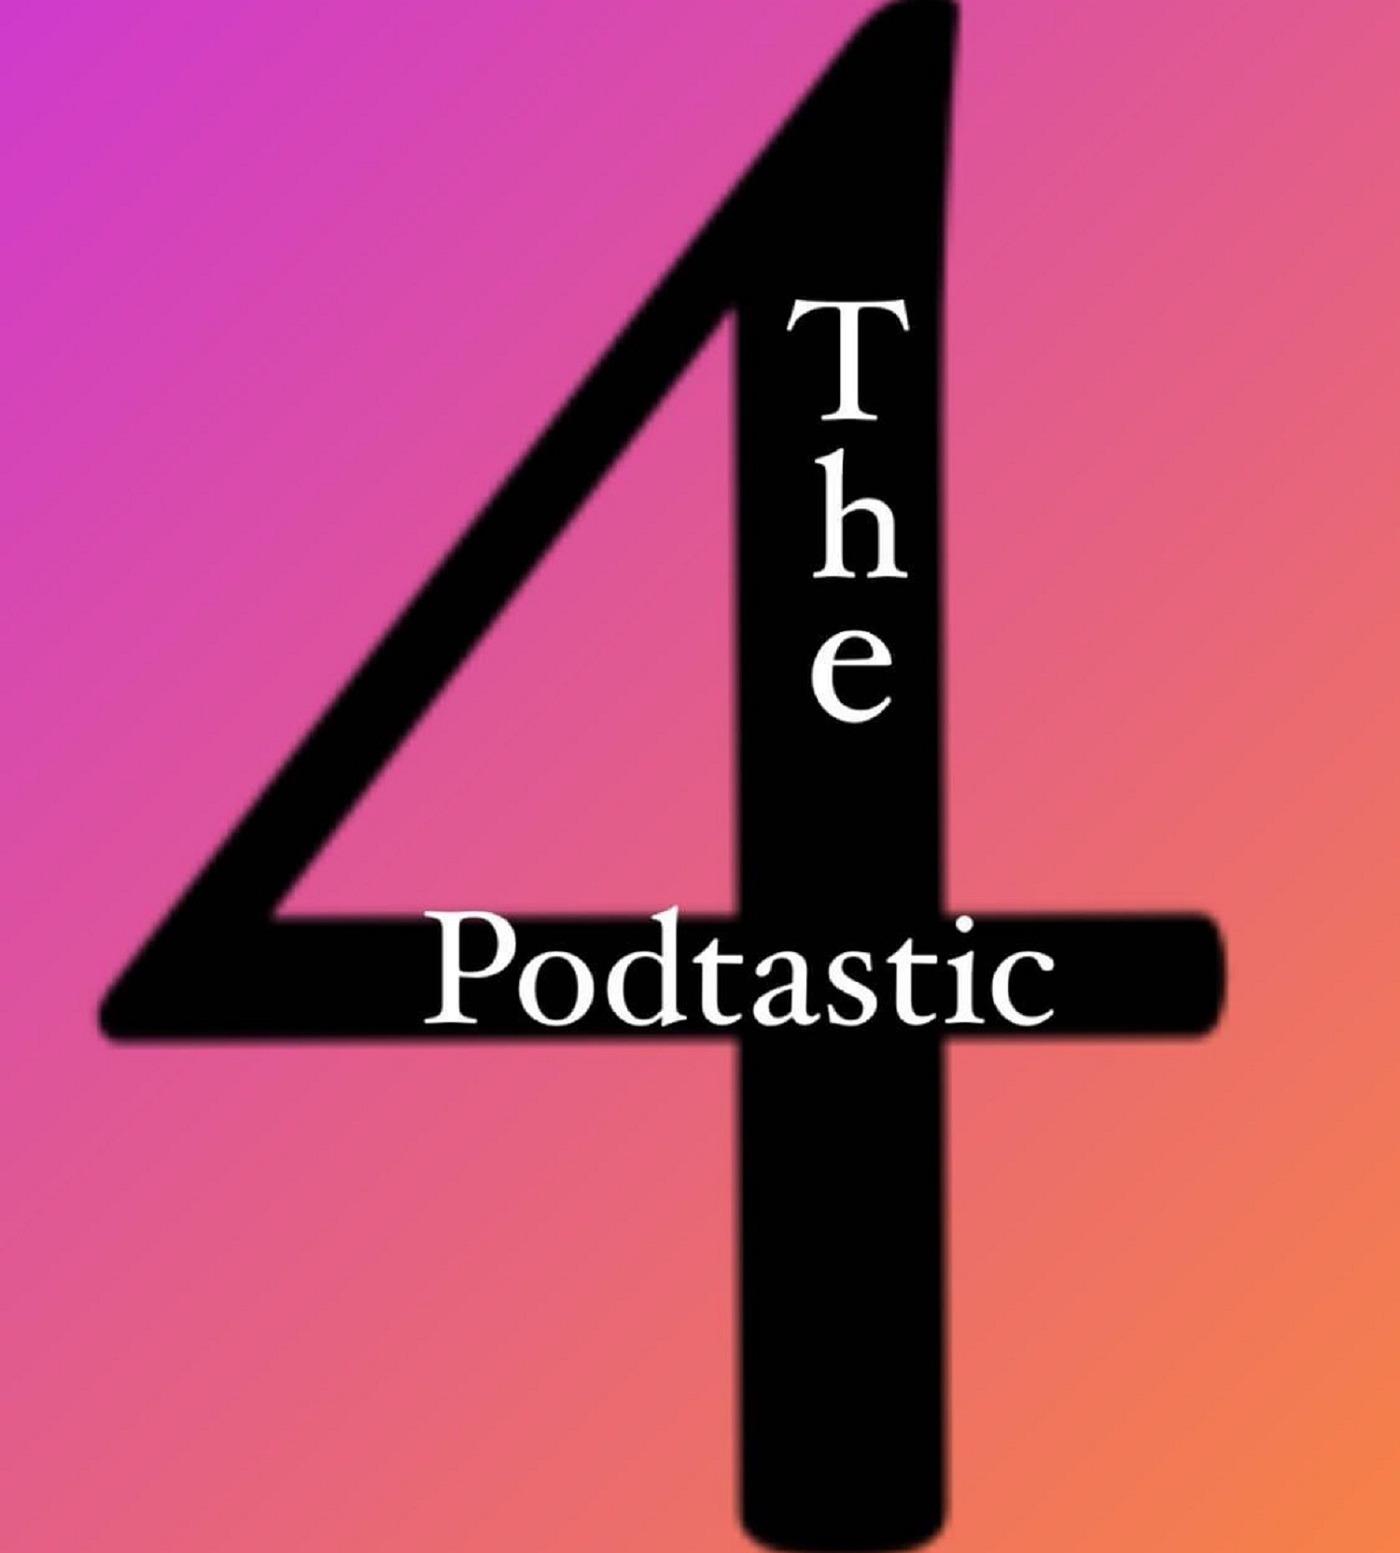 tHe PoDtAsTiC 4